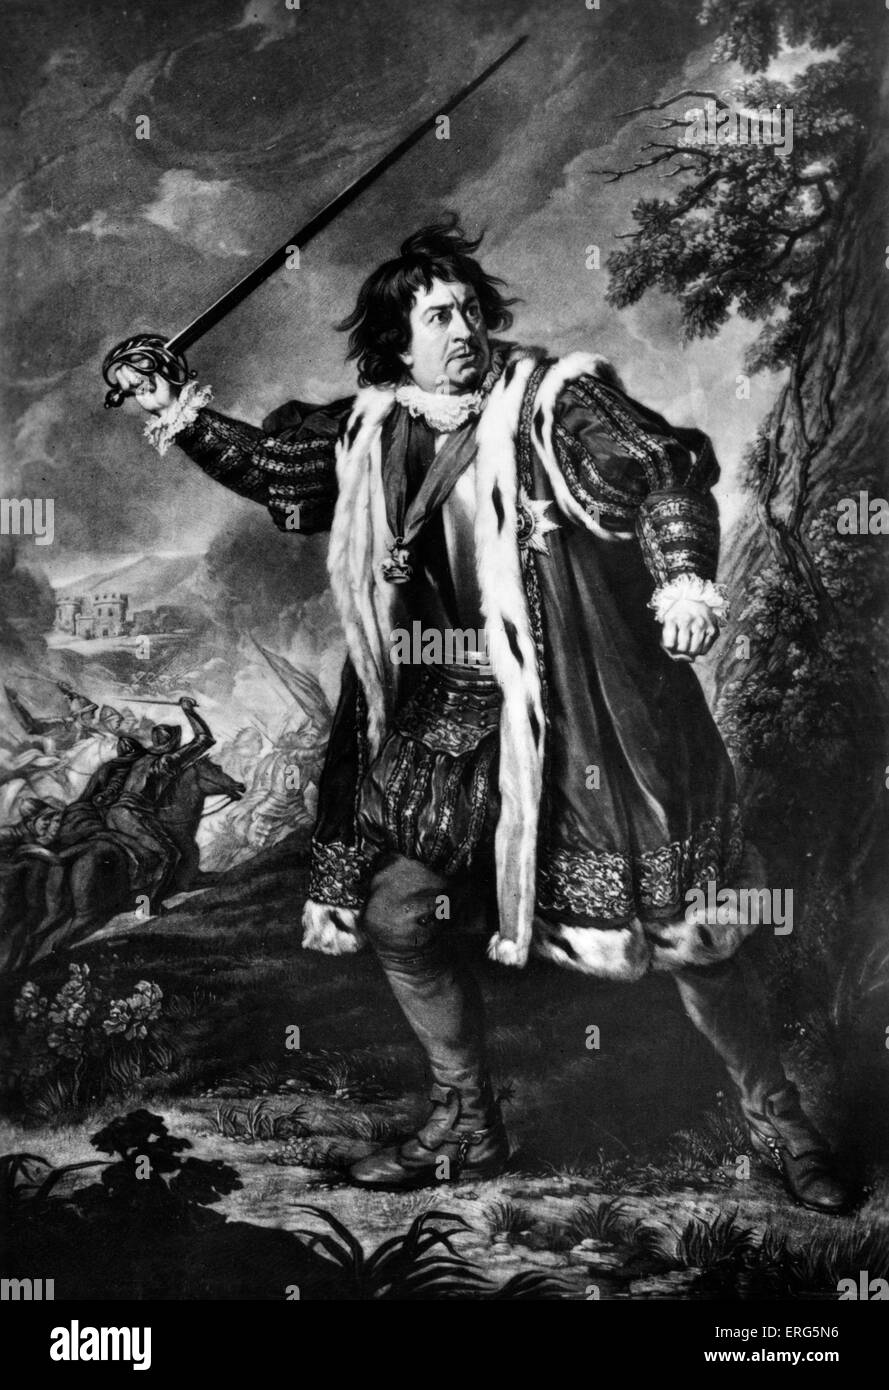 David Garrick as Richard III. From a mezzotint by S.W. Reynolds after N.Dance in the Collection of Mr. Harry R. Beard. DG: Stock Photo